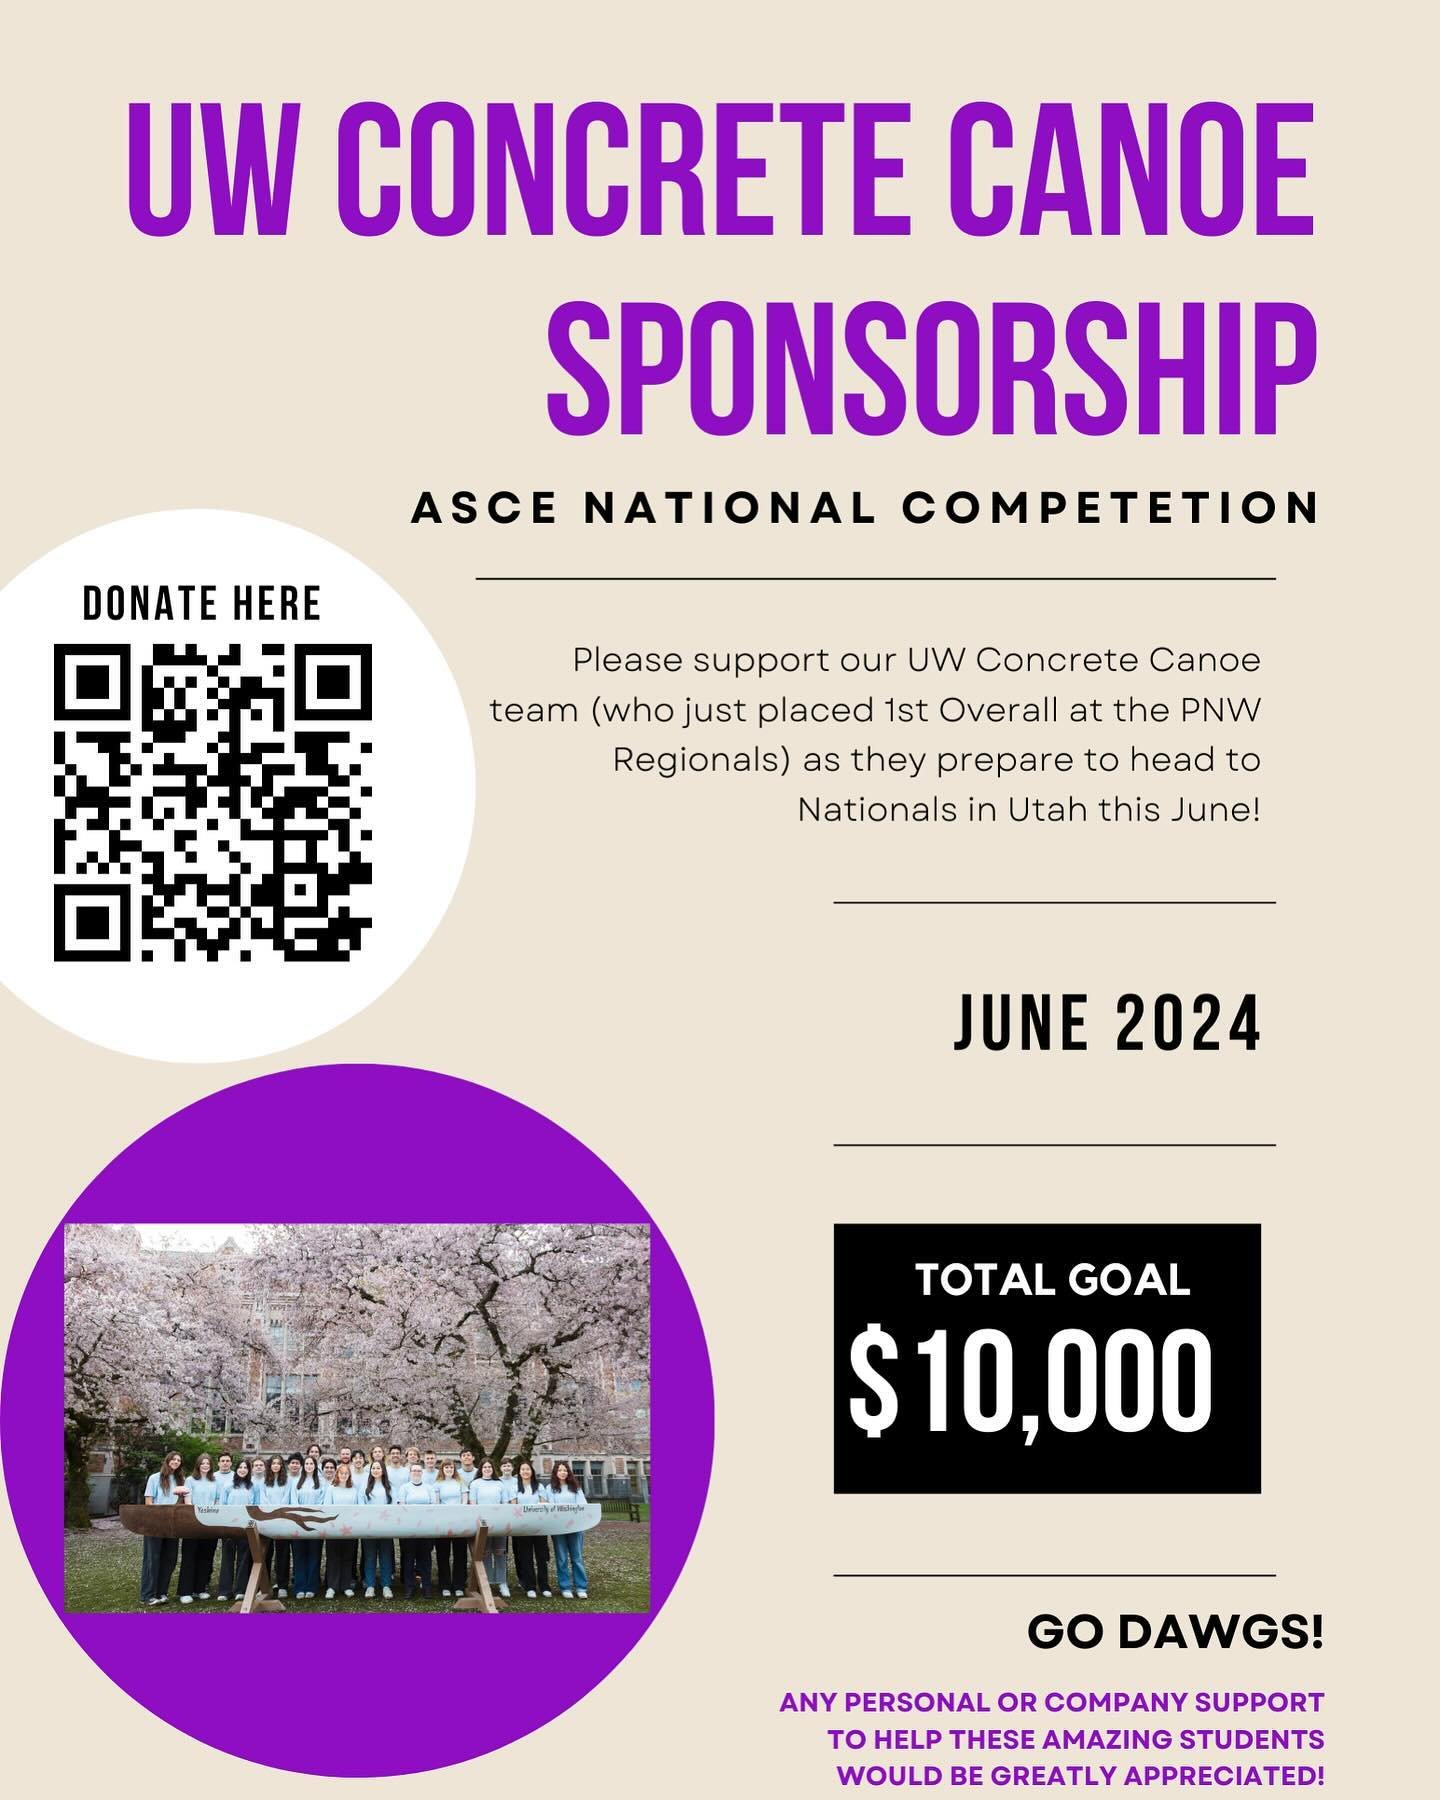 Please spread the word and consider supporting the University of Washington Concrete Canoe Team as they compete in the ASCE Concrete Canoe National Competition in Utah this June!